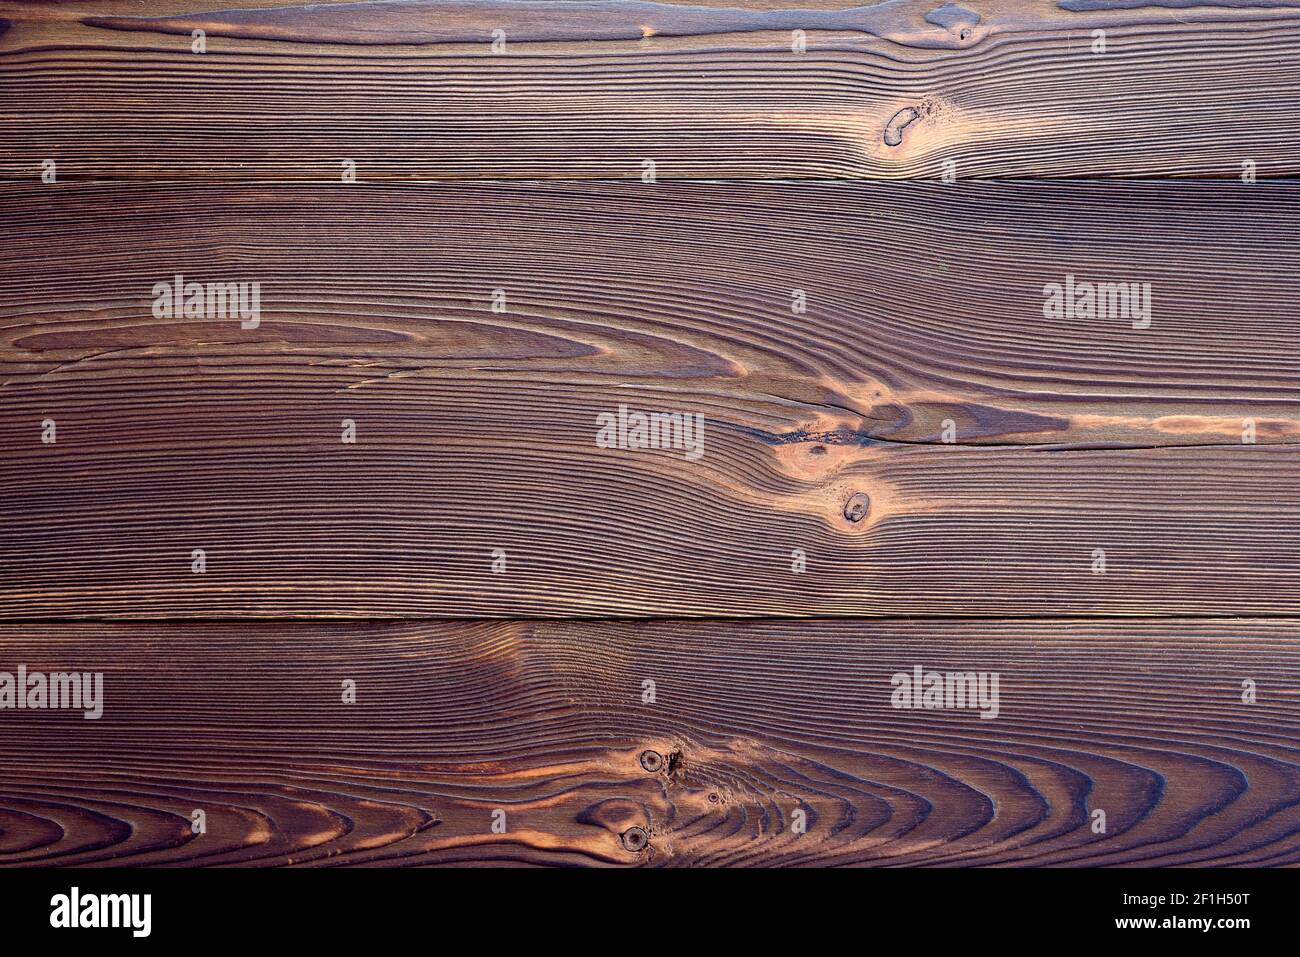 Beautiful pine rustic wooden planks, flat-lay top view, rustic brown board photography backdrop Stock Photo